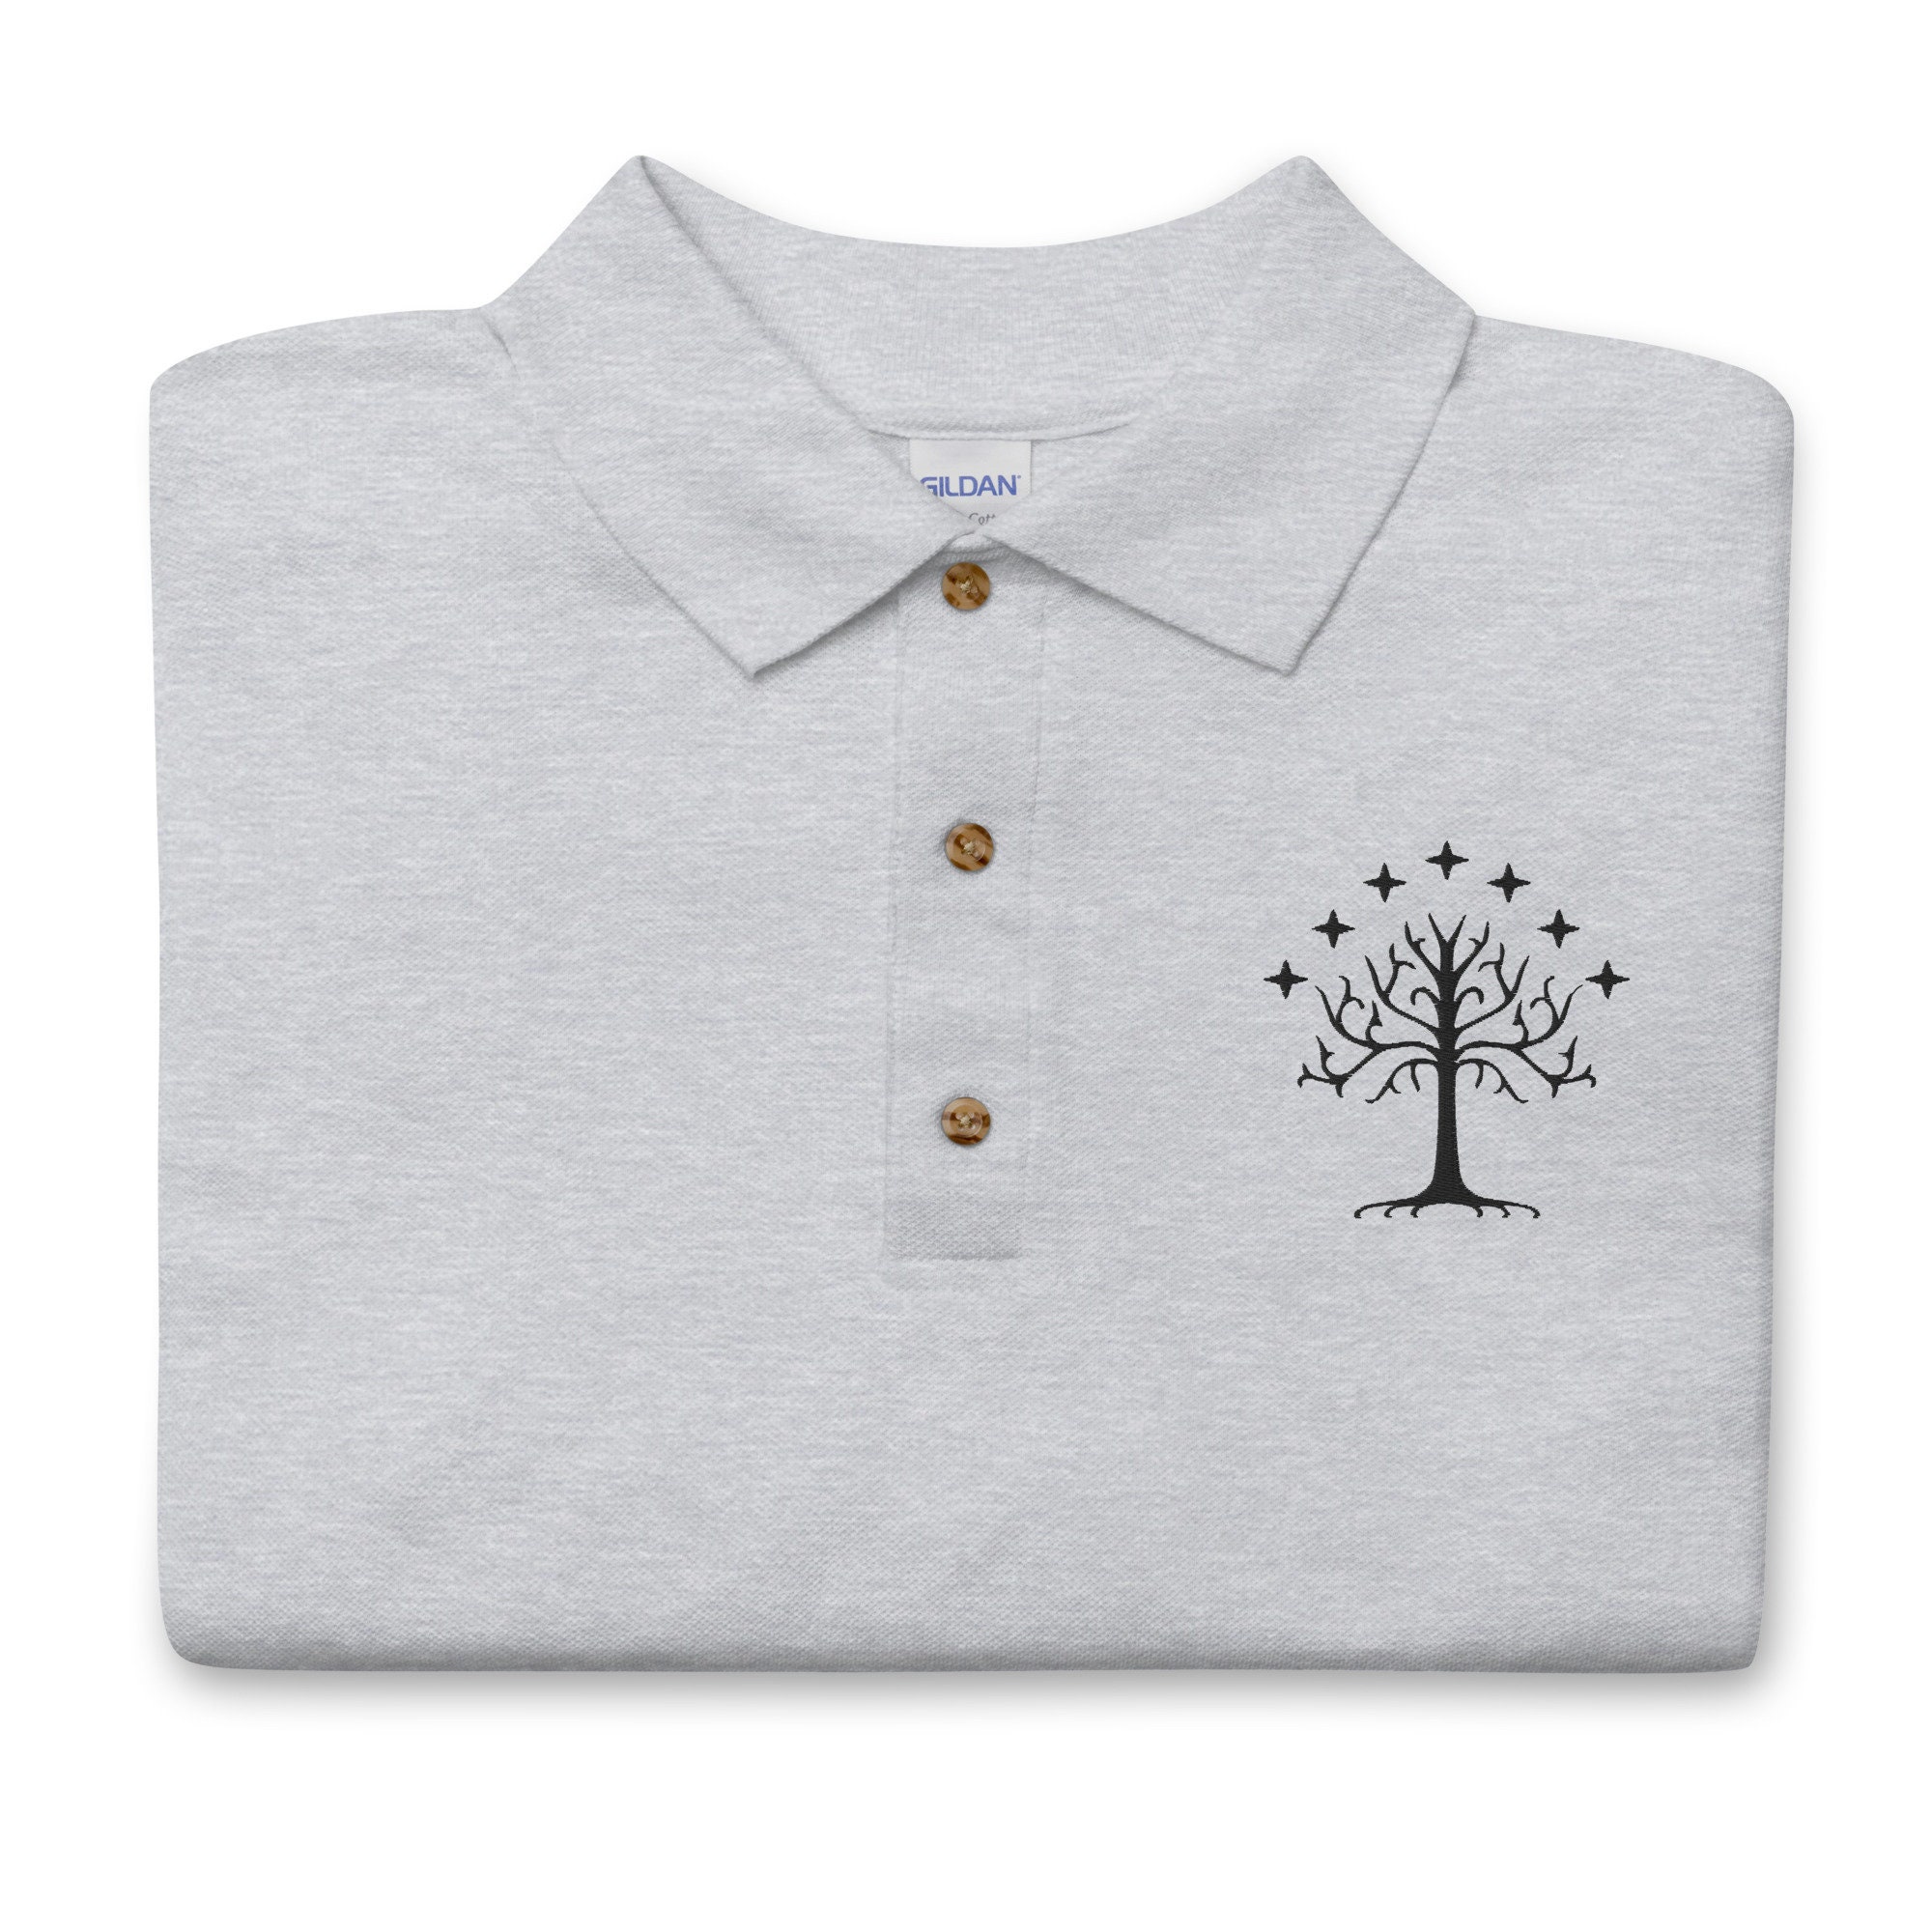 Discover White Tree of Gondor Embroidered Polo Shirt